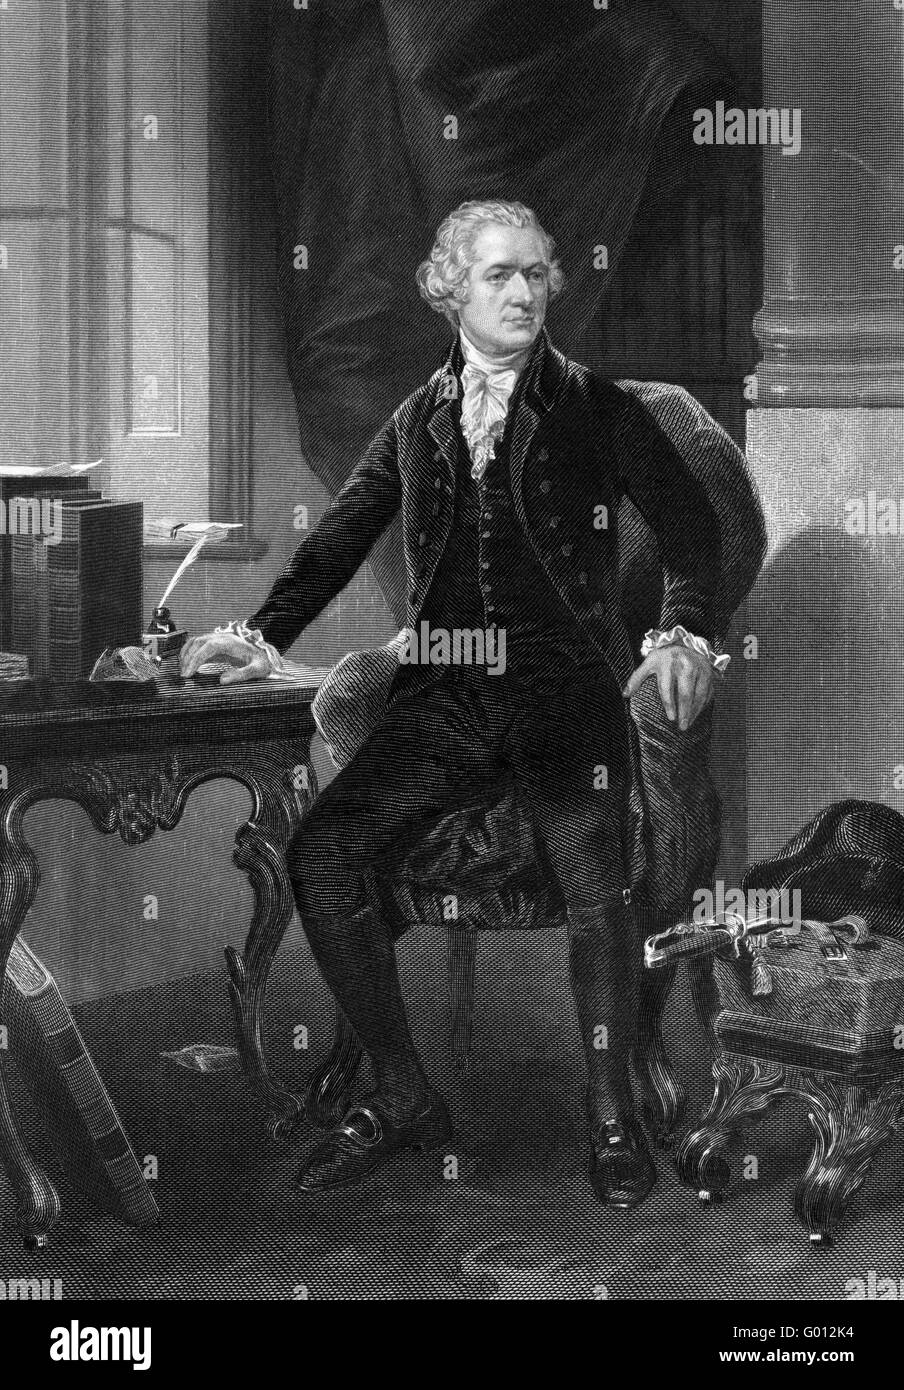 Alexander Hamilton (1755-1804), a founding Father of the United States and chief aide to General George Washington. An 1861 engraving from a painting by Alonzo Chappel. Stock Photo